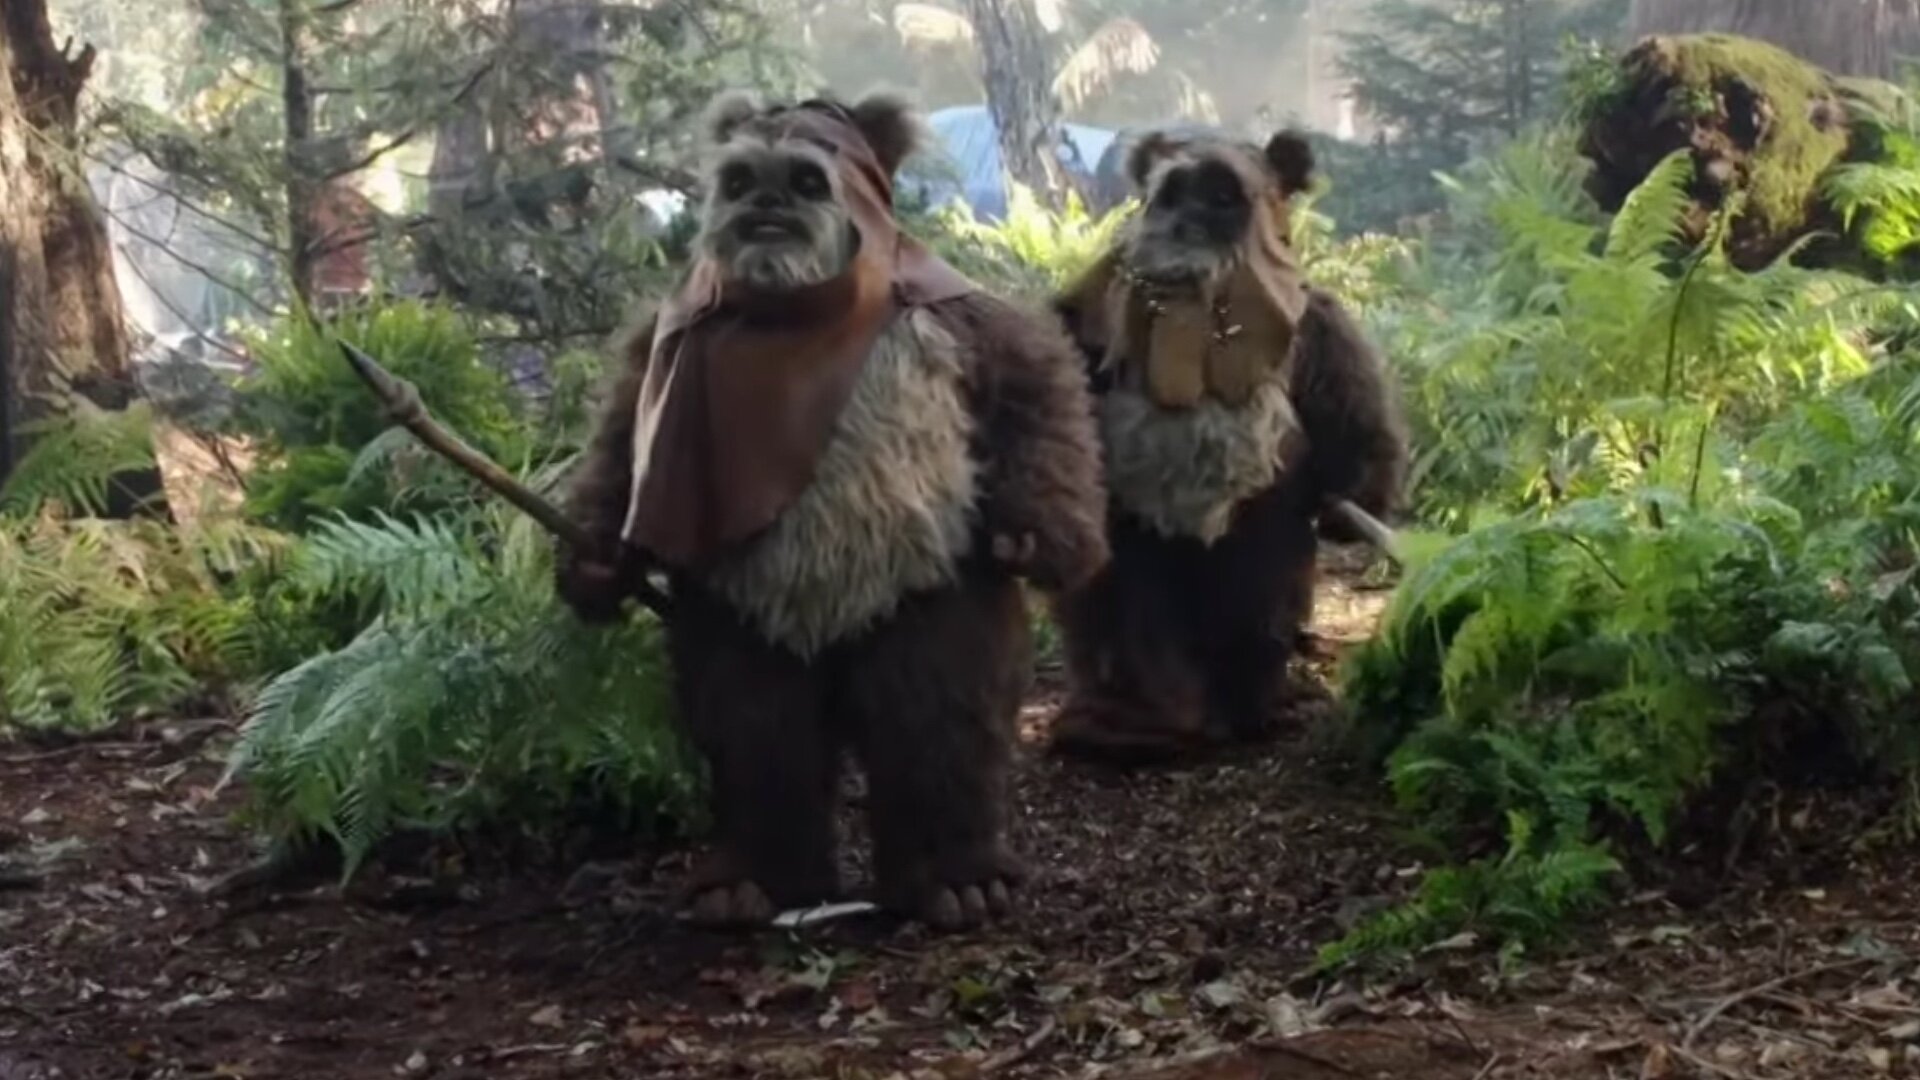 Watch Warwick Davis and His Son Suit Up as Ewoks in Behind-the-Scenes Video...